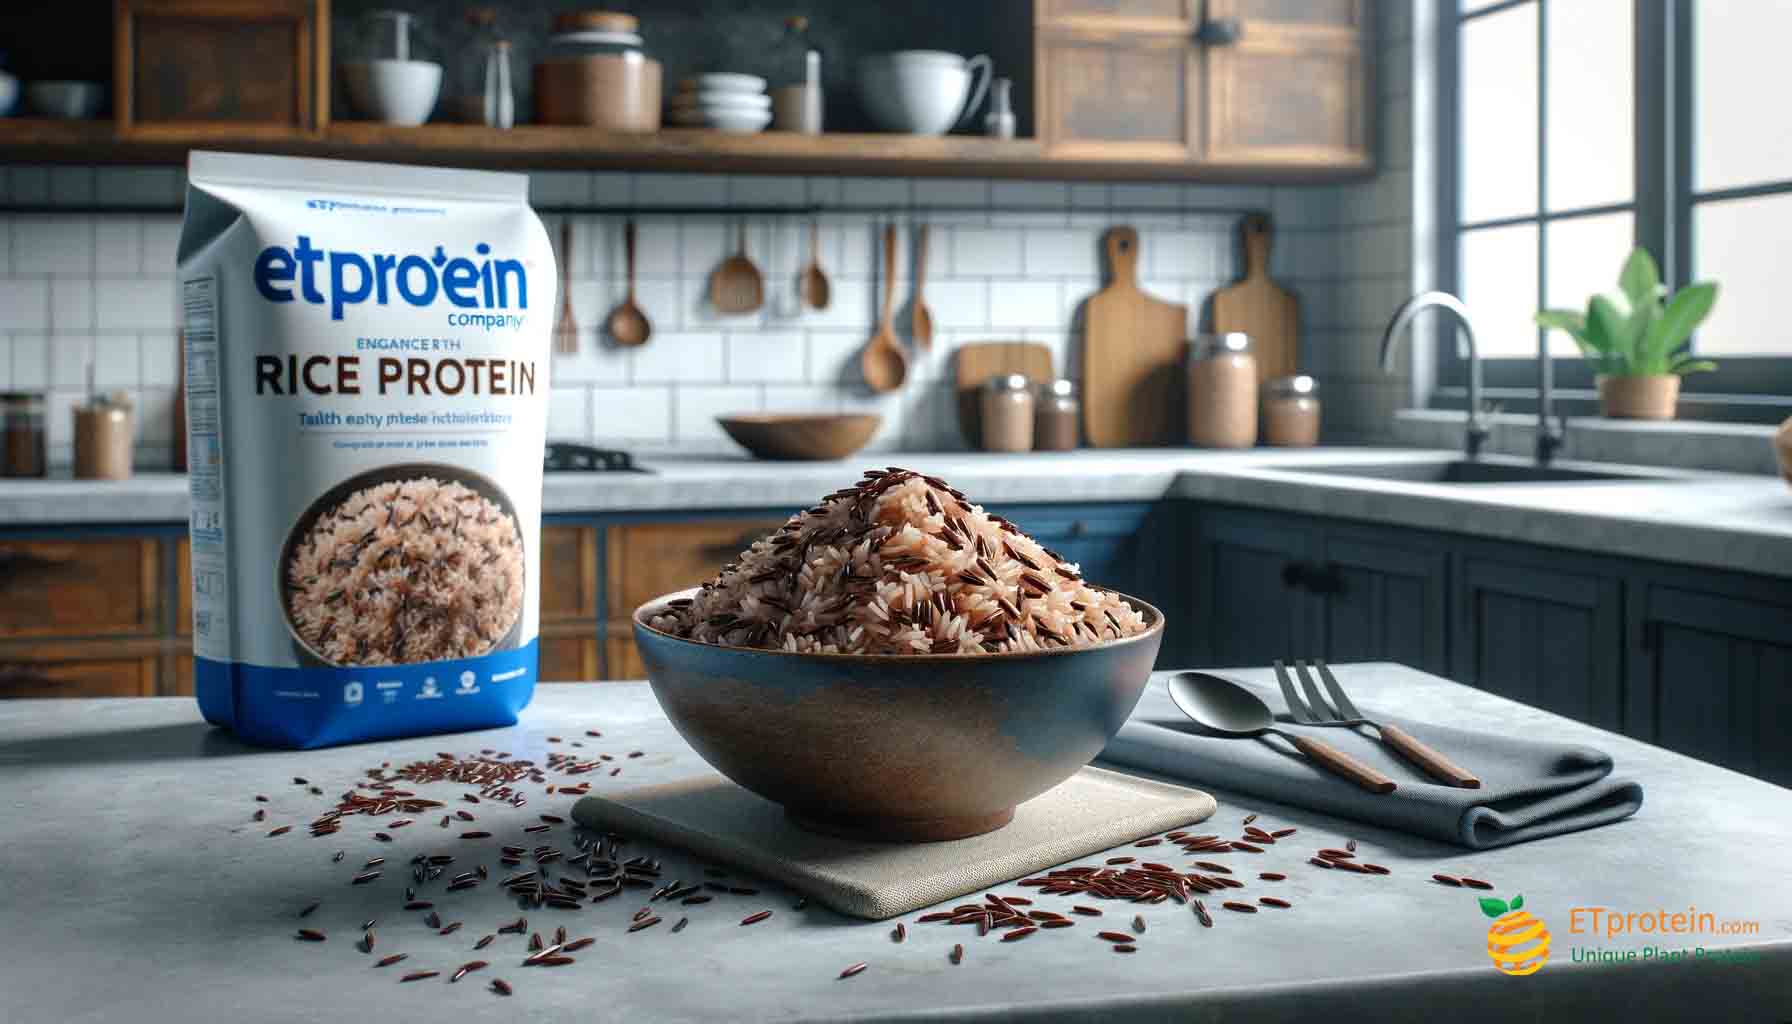 The Perfect Protein Pairing for Dirty Rice: A Culinary Exploration.Explore optimal protein pairings for dirty rice, including ETprotein's rice protein, for a flavorful, nutritious culinary journey.